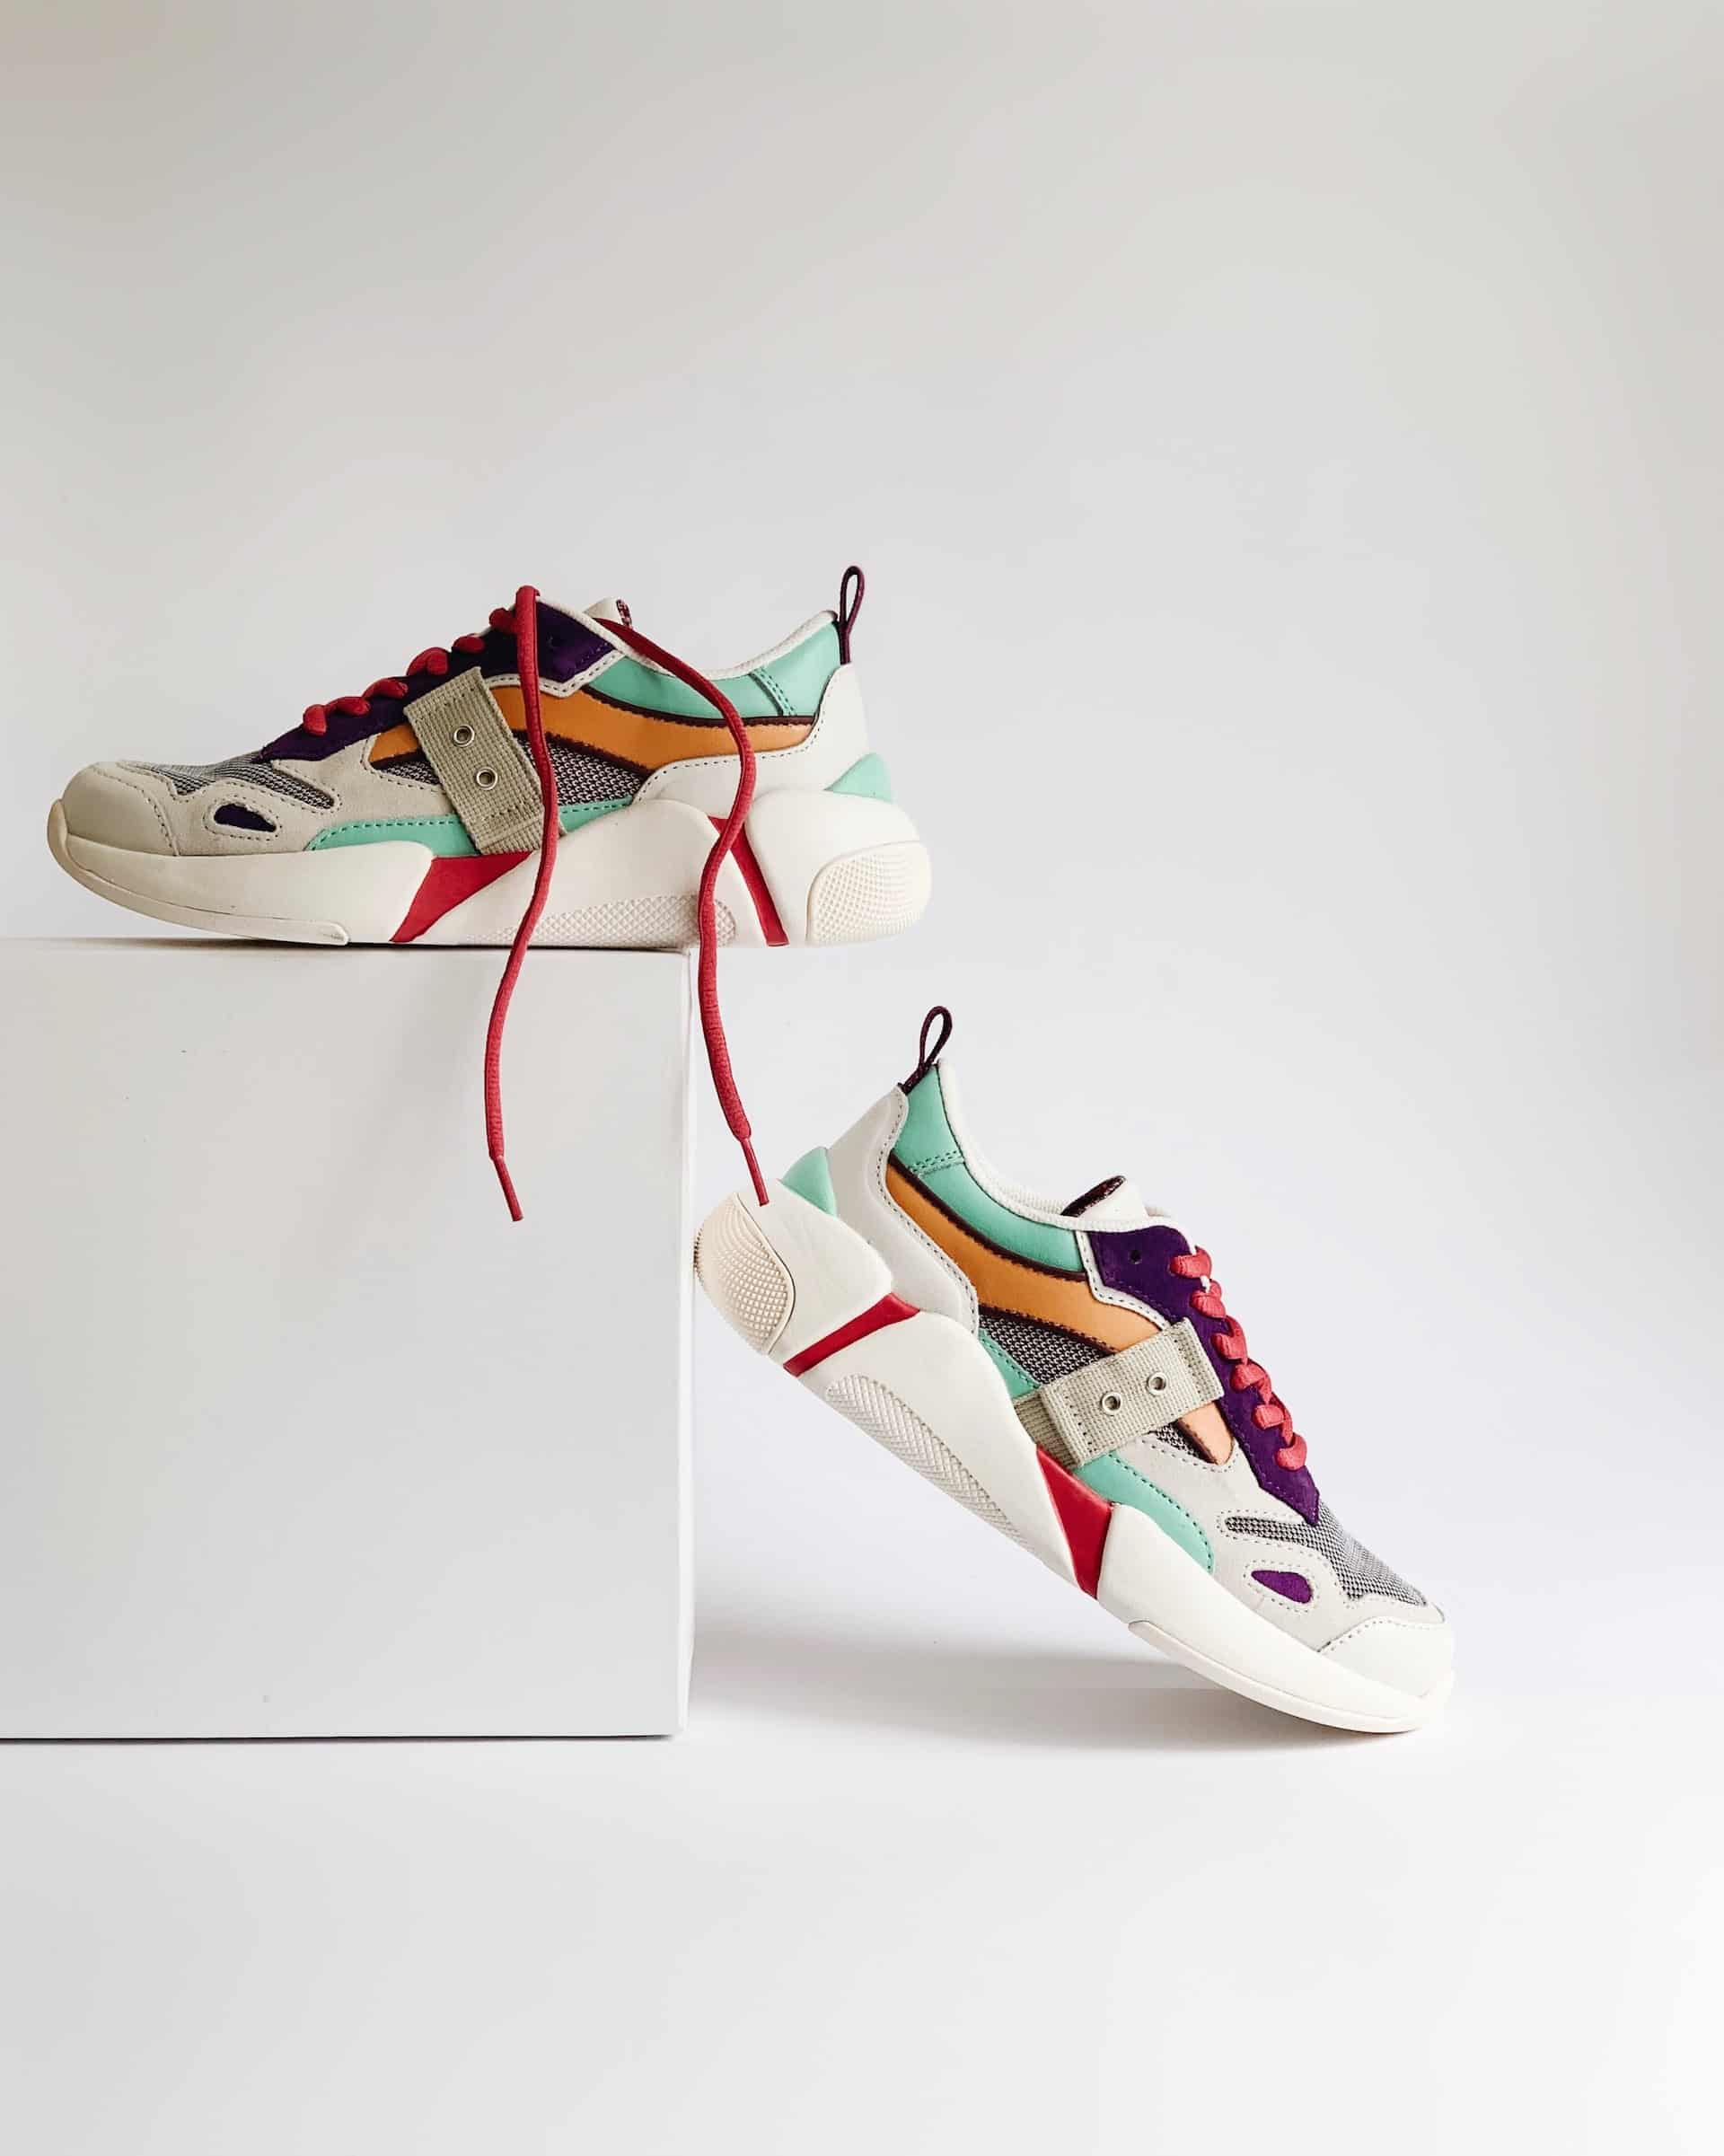 Custom Painted Shoes: A Unique and Personal Fashion Statement